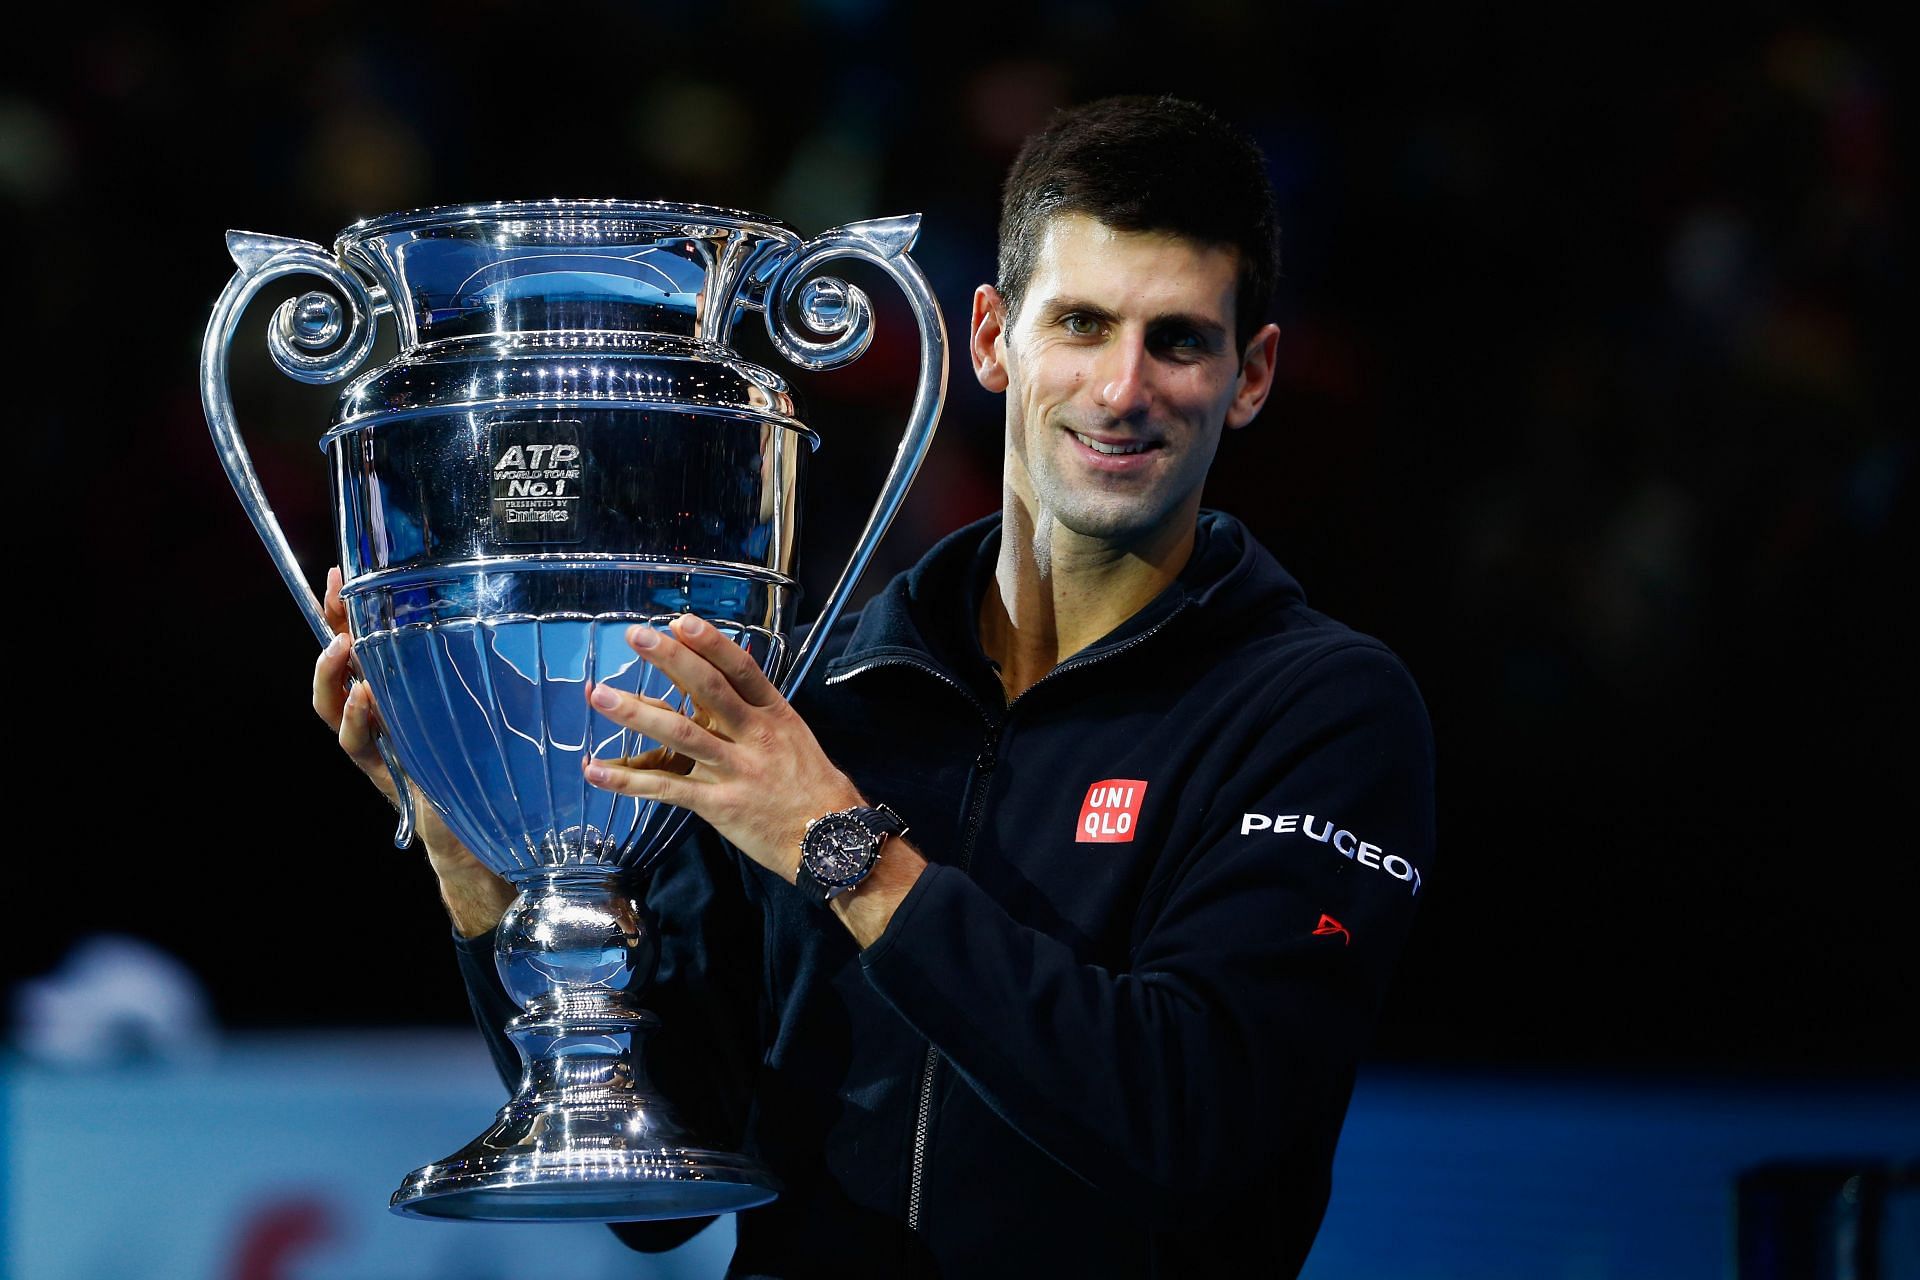 Novak Djokovic is the only player to be ranked No. 1 in the World during 11 different years